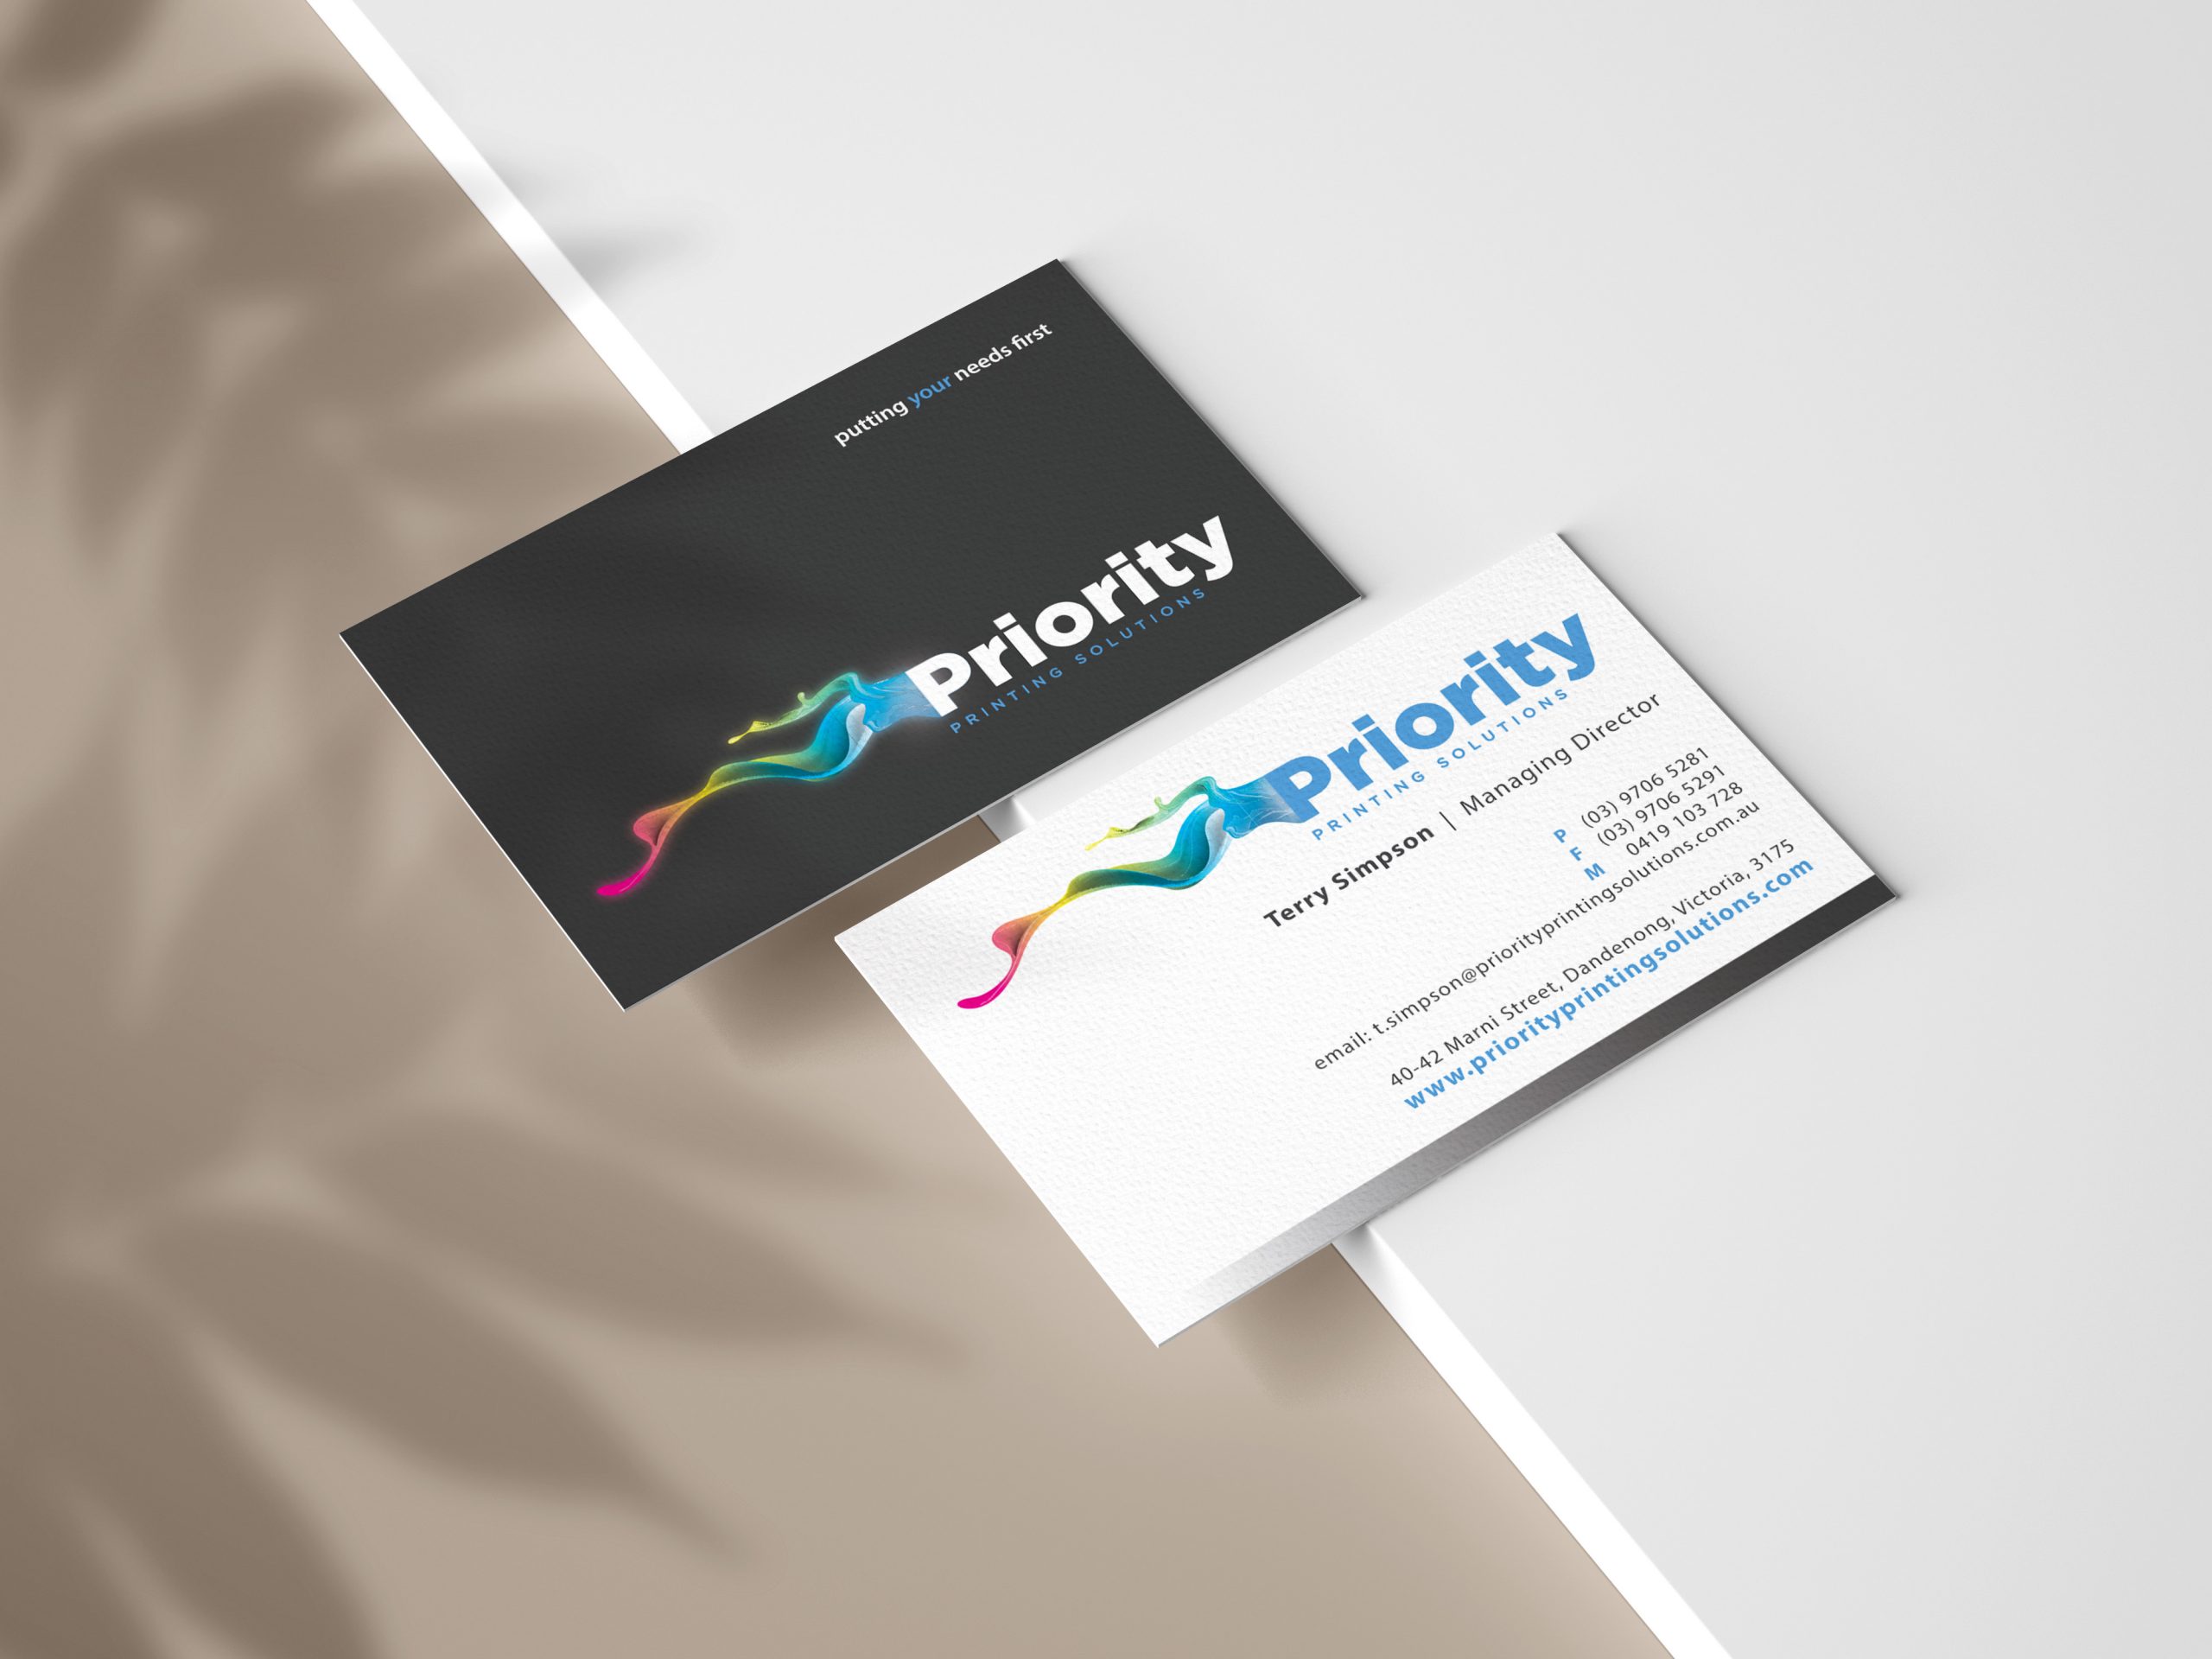 //www.priorityprintingsolutions.com.au/wp-content/uploads/2020/08/Business-Cards-scaled.jpg